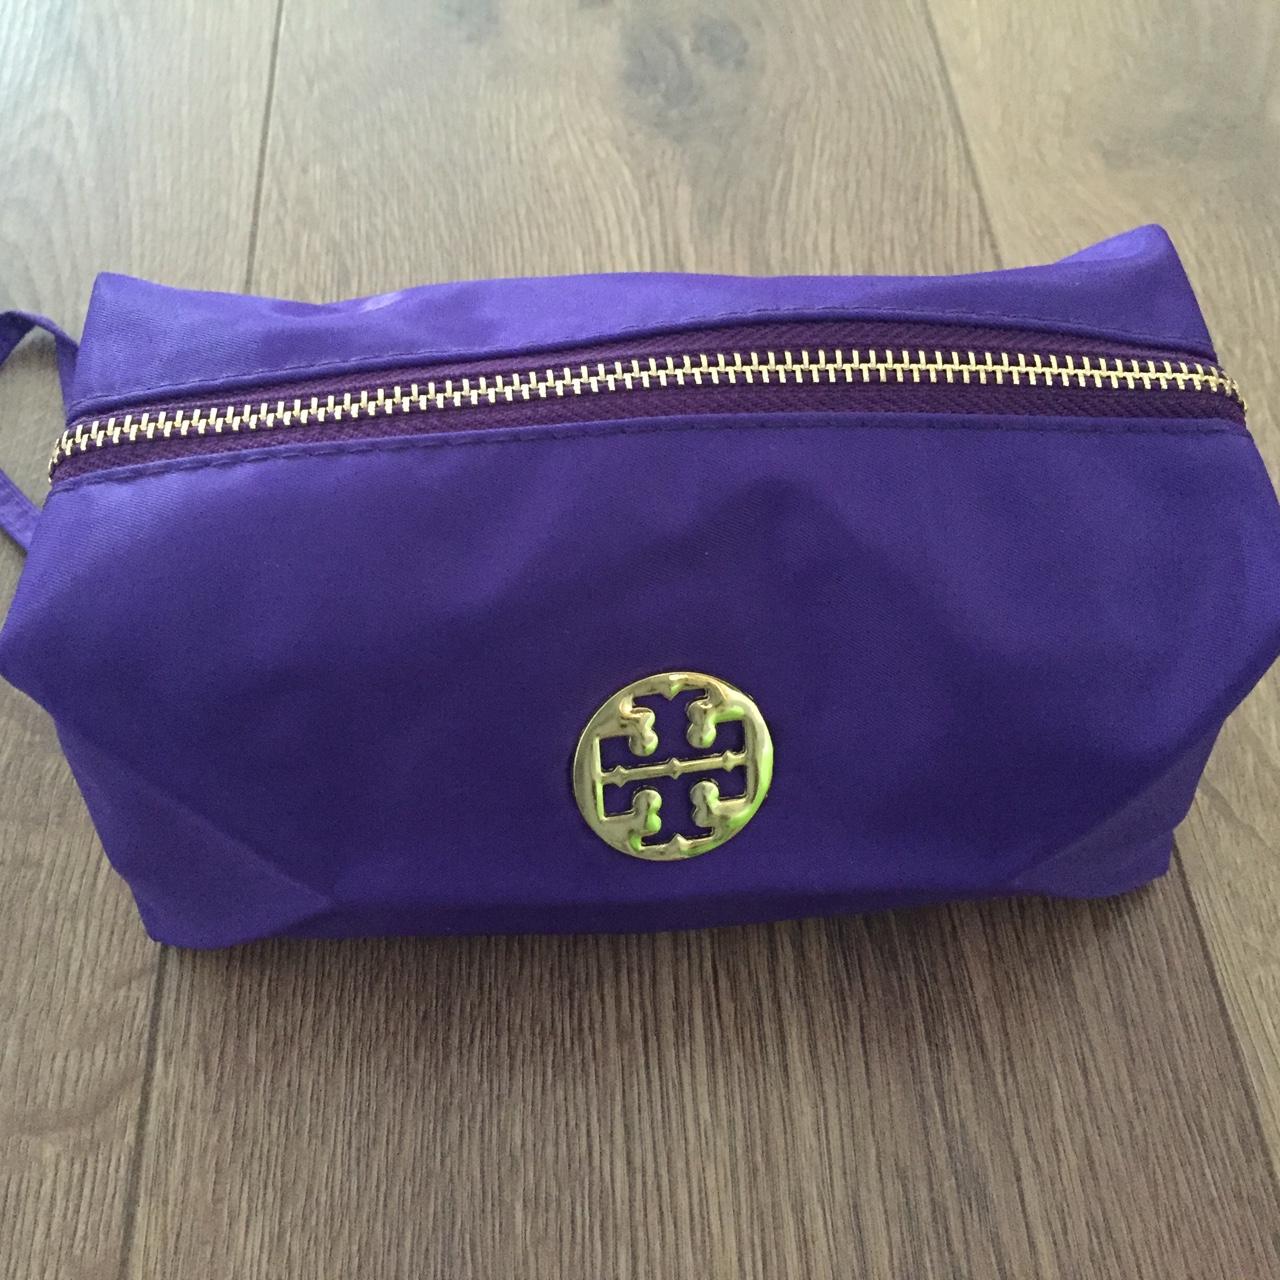 TORY BURCH PURPLE COSMETIC BAG. CAN BE USED AS WASH - Depop